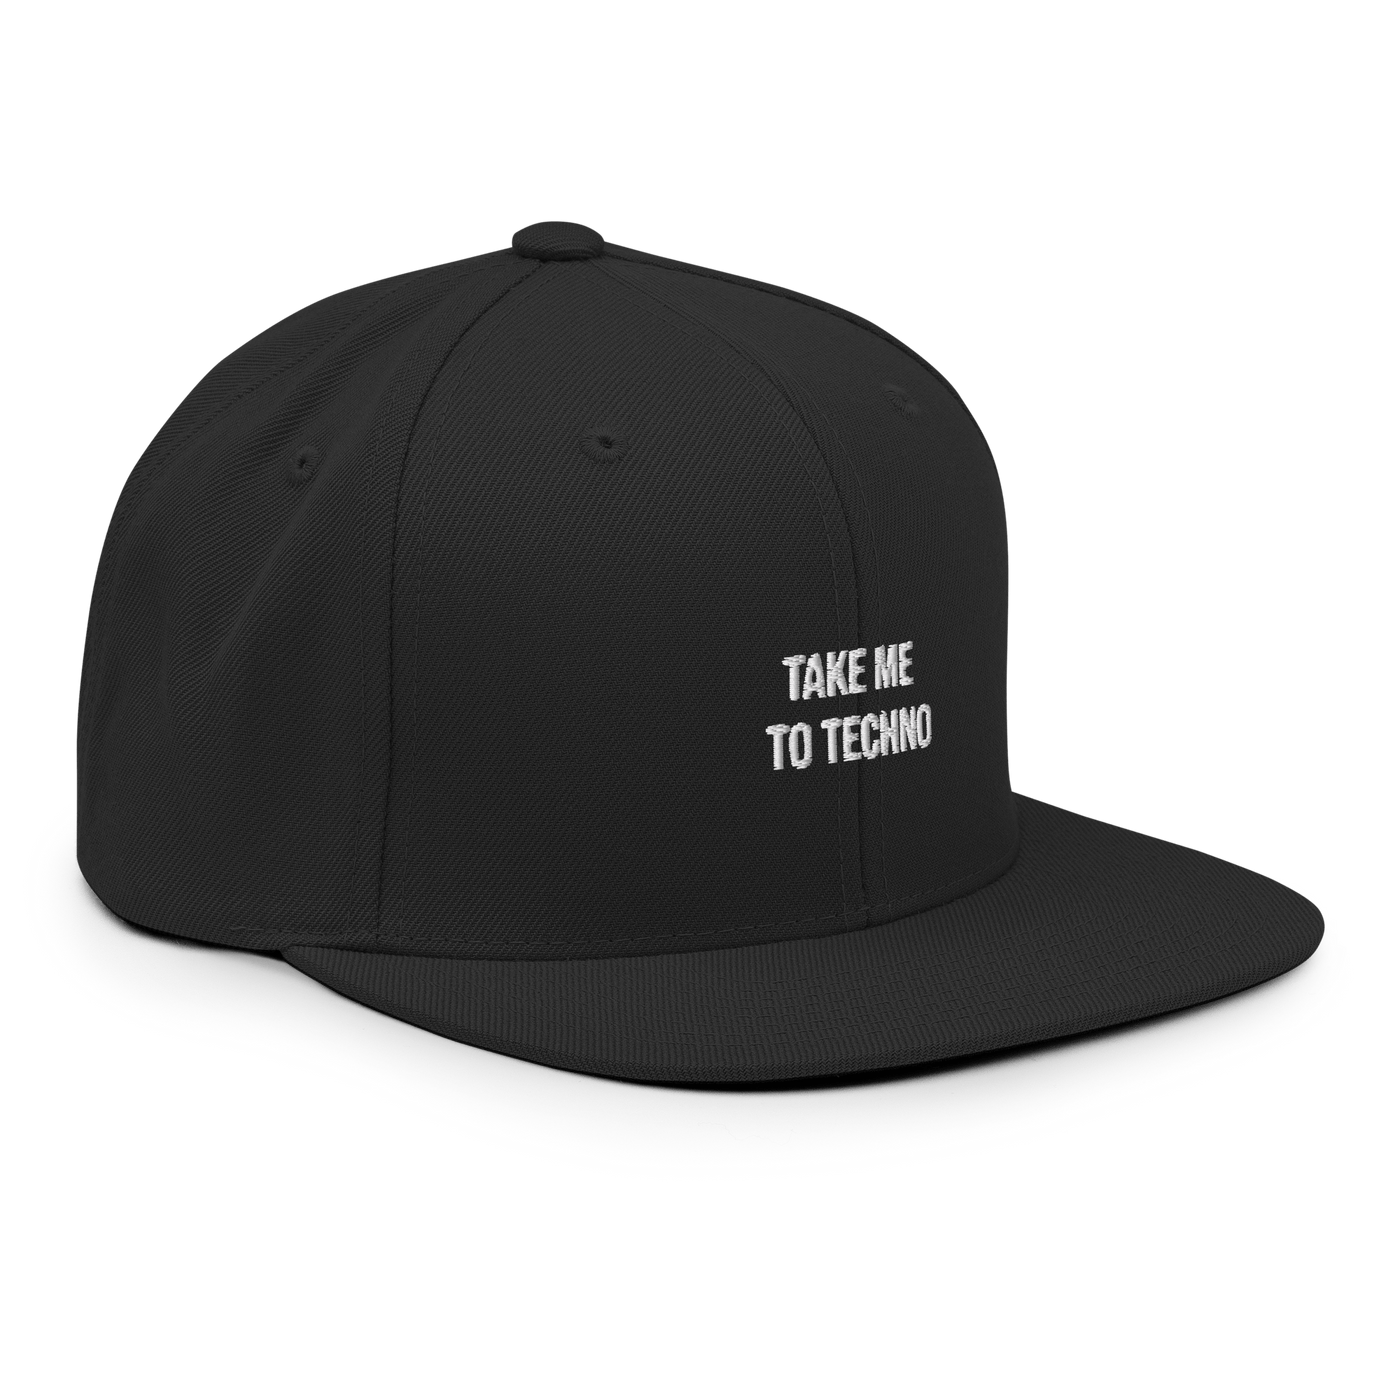 Take me to techno Snapback - Dark Navy - - Just Another Cap Store